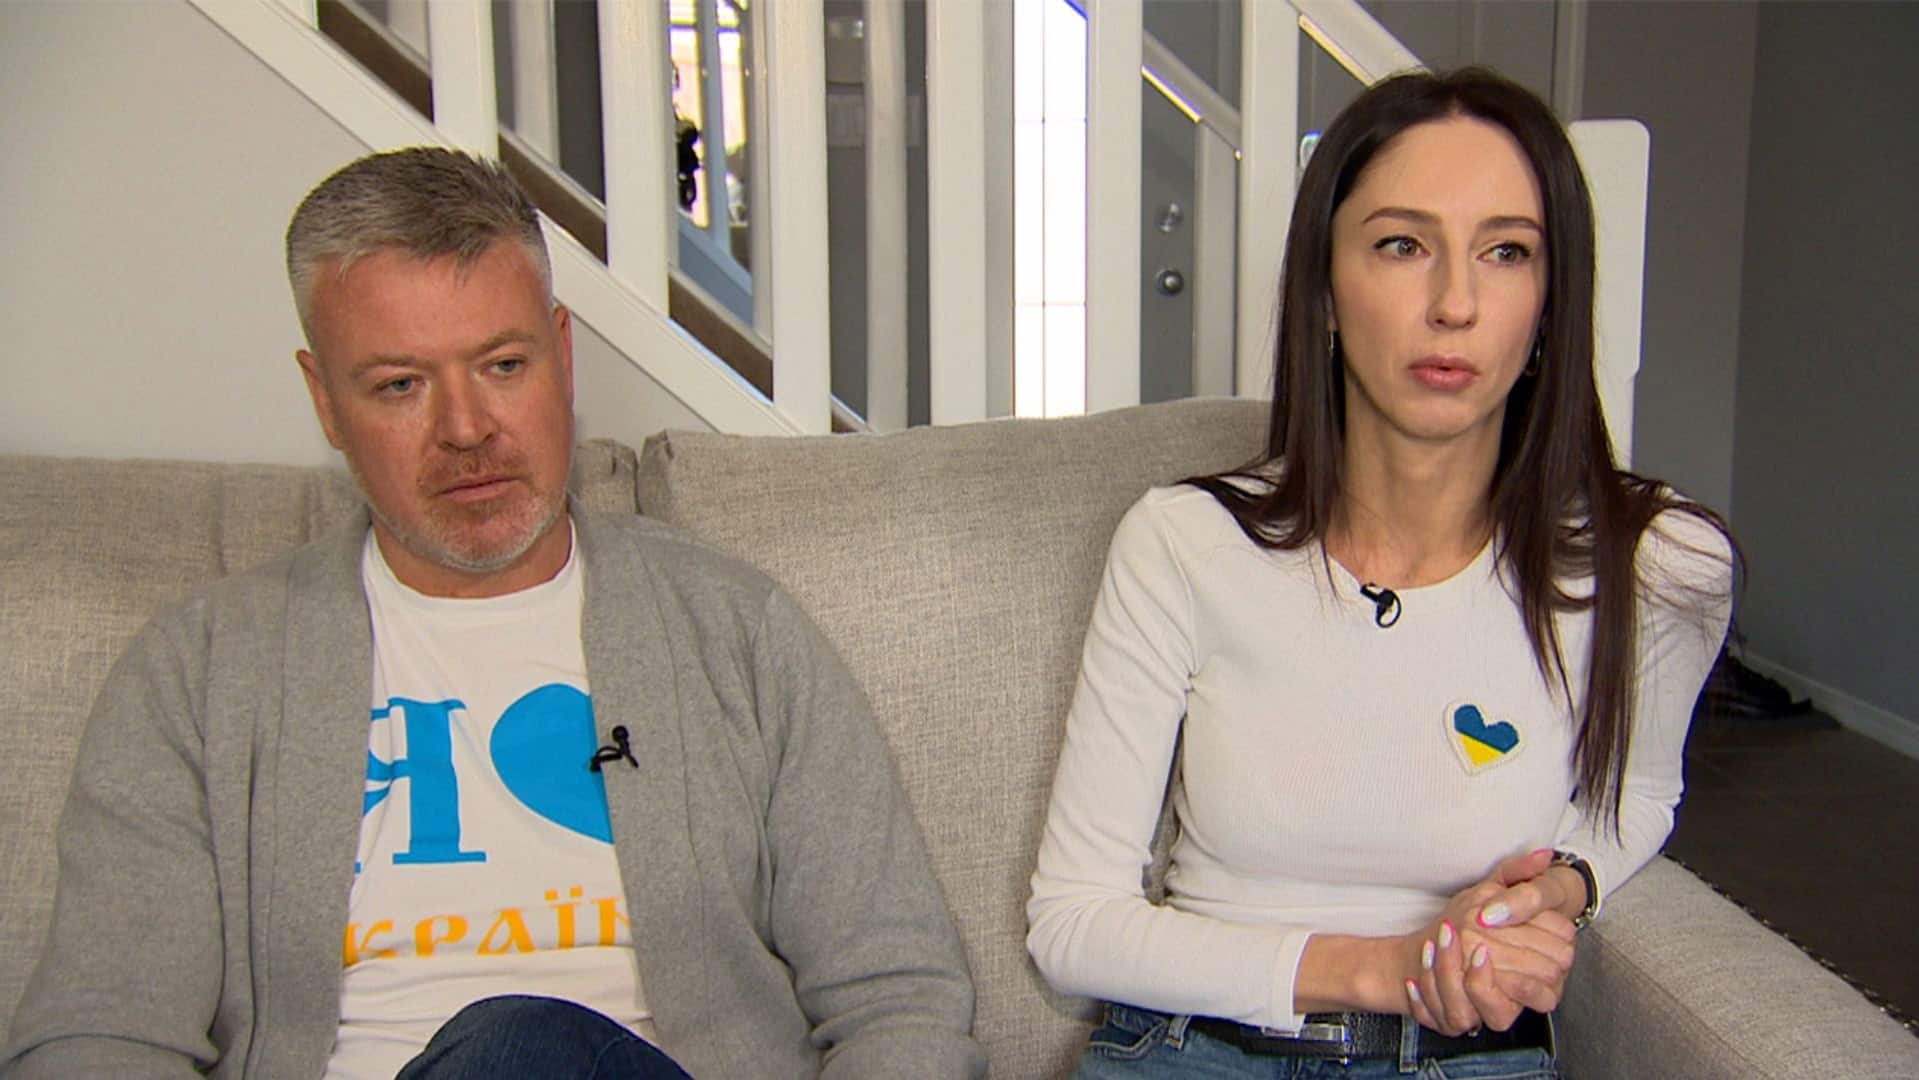 Ukrainian couple&#8217;s Canadian visa was supposed to take 2 weeks. 3 months on, they&#8217;re still waiting